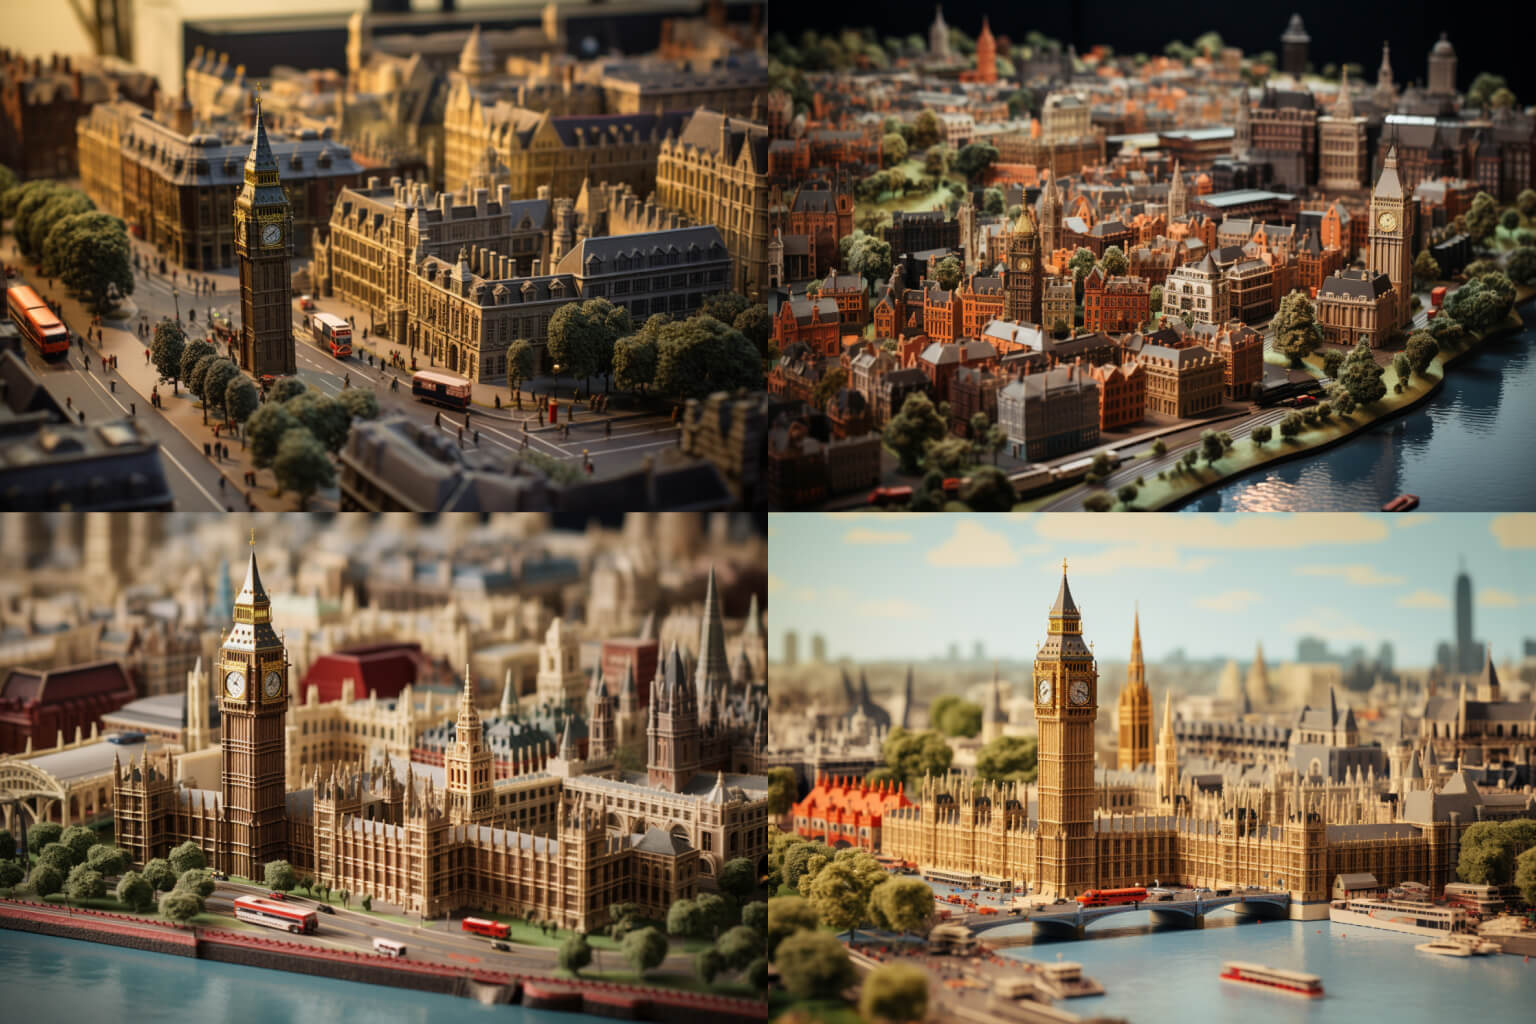 Image of London, in the style of miniature faking, produced by Midjourney, using an aspect ratio 3:2